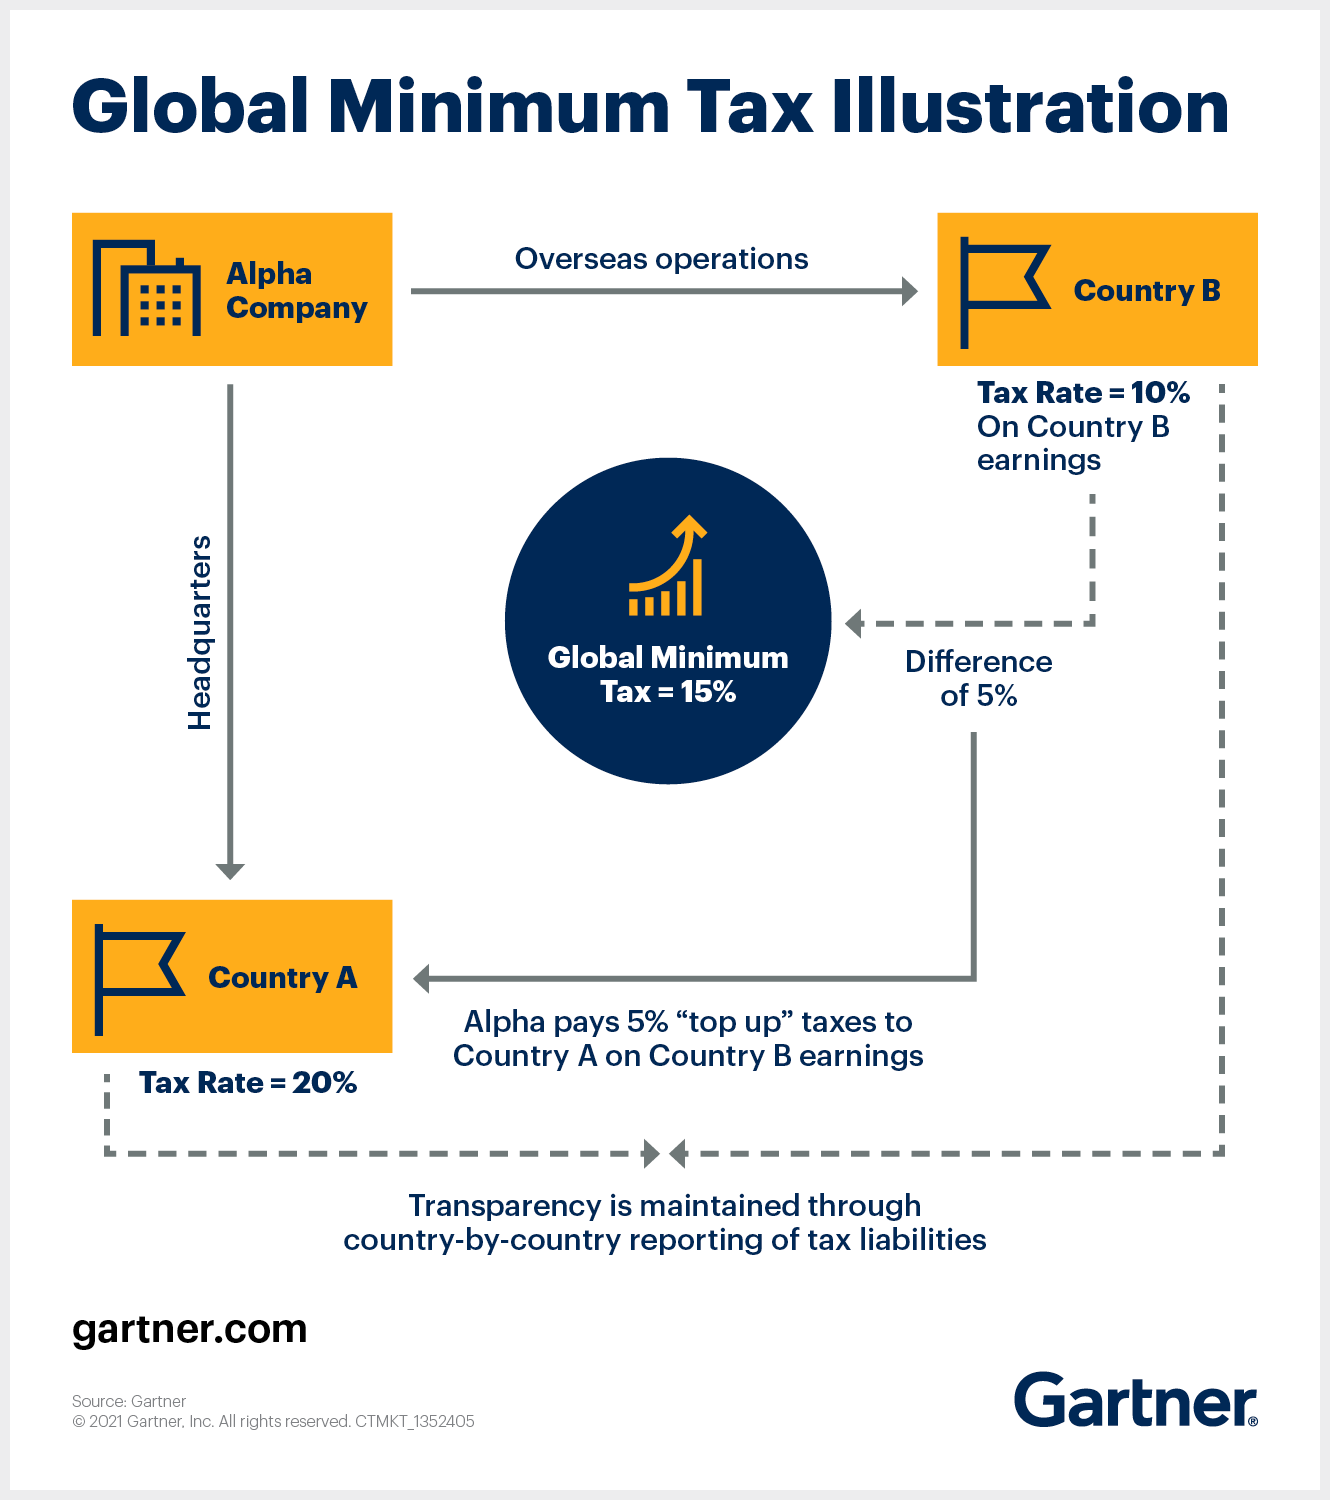 Key Actions for Tax Leaders on Global Minimum Tax